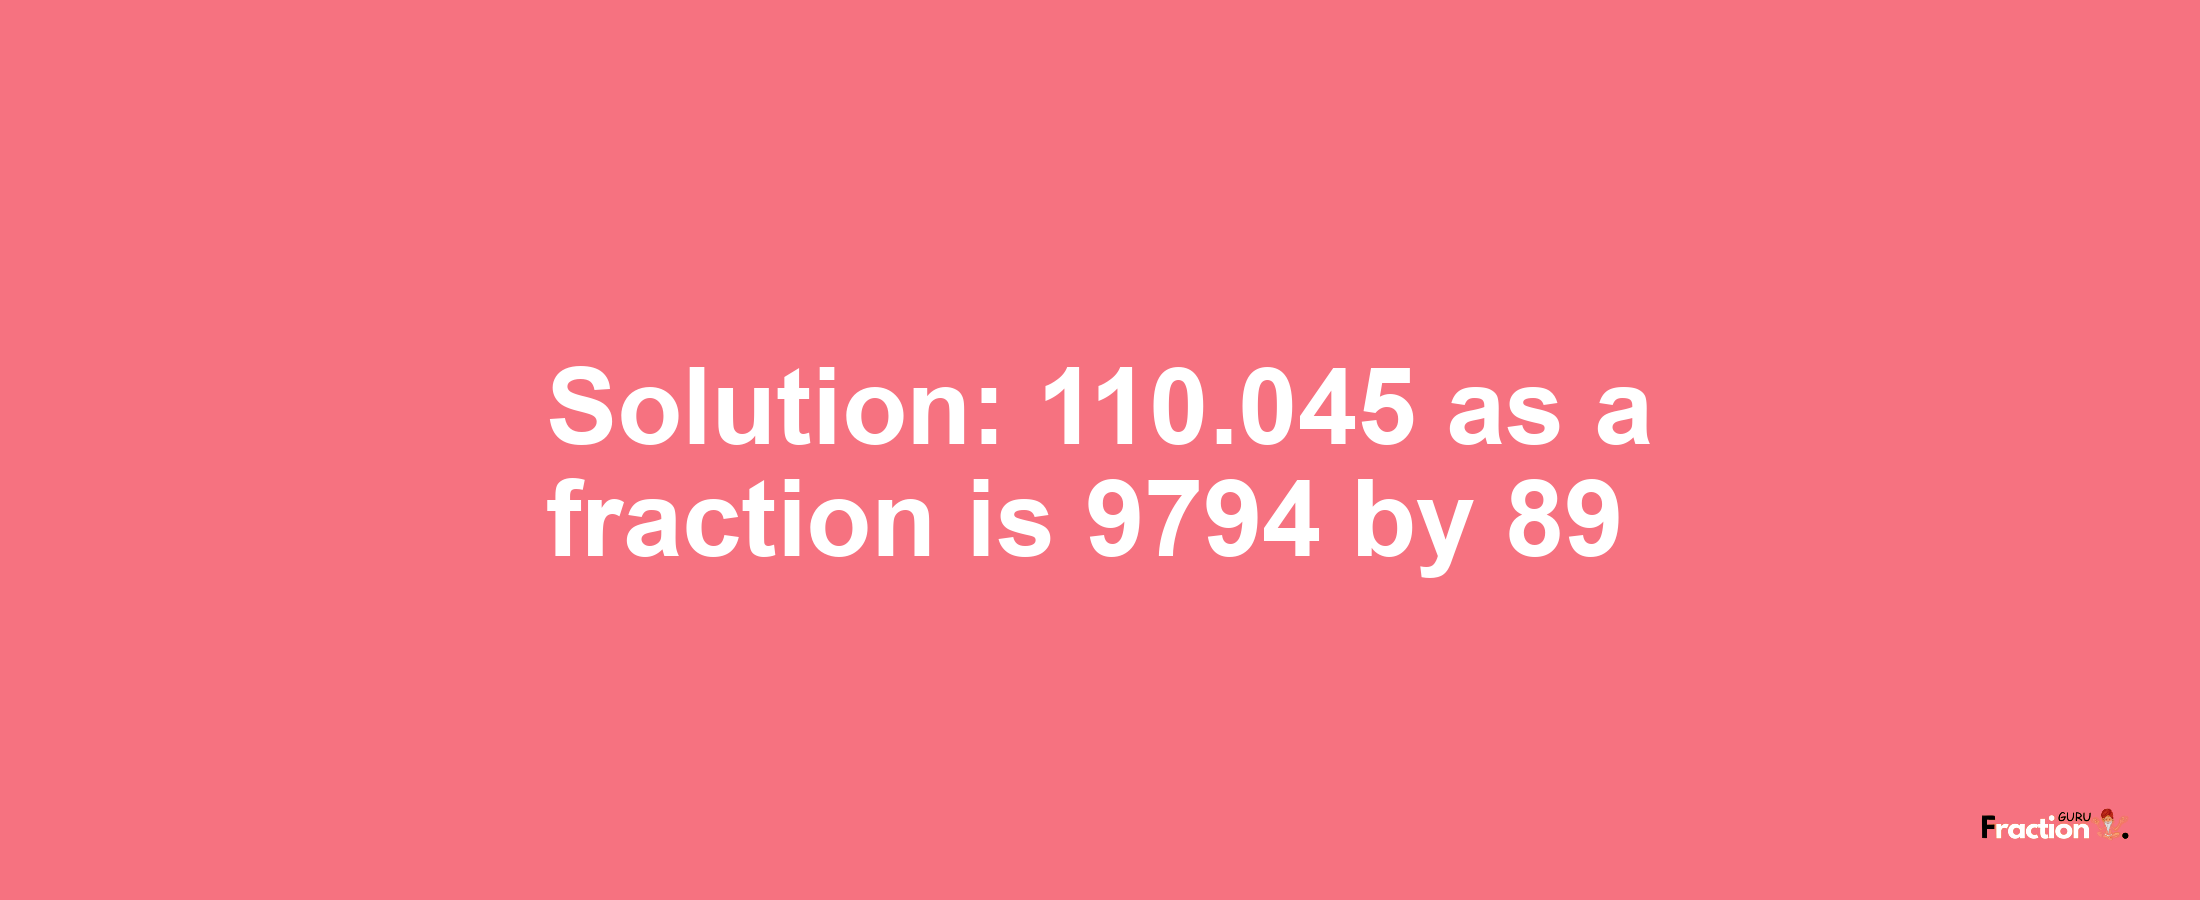 Solution:110.045 as a fraction is 9794/89